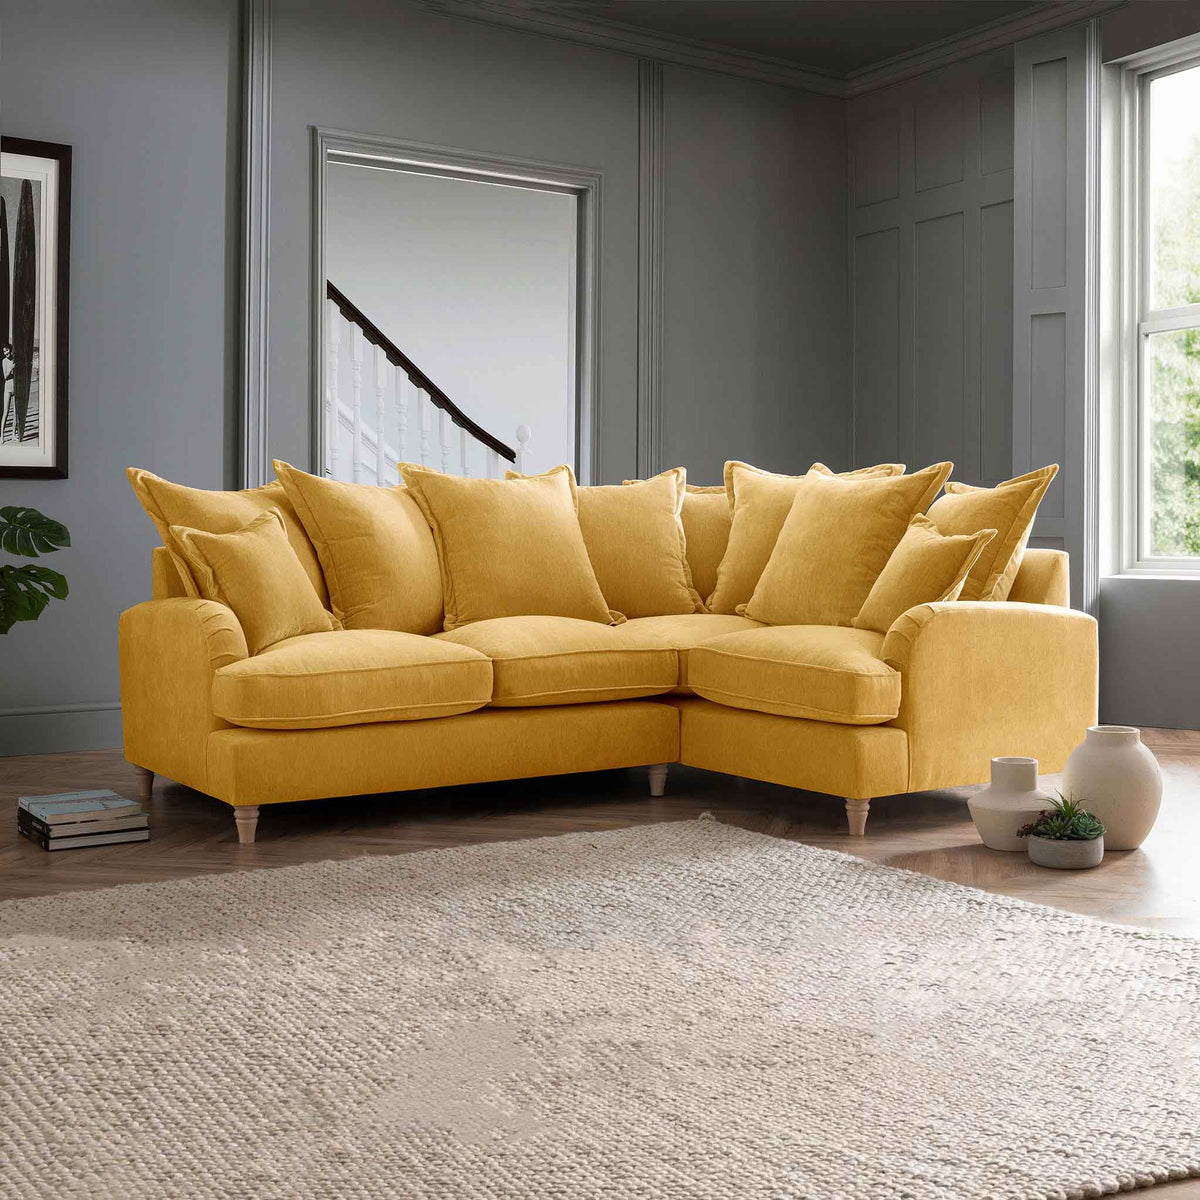 Rupert Gold 2 Corner 1 Right Hand Sofa Couch for living room